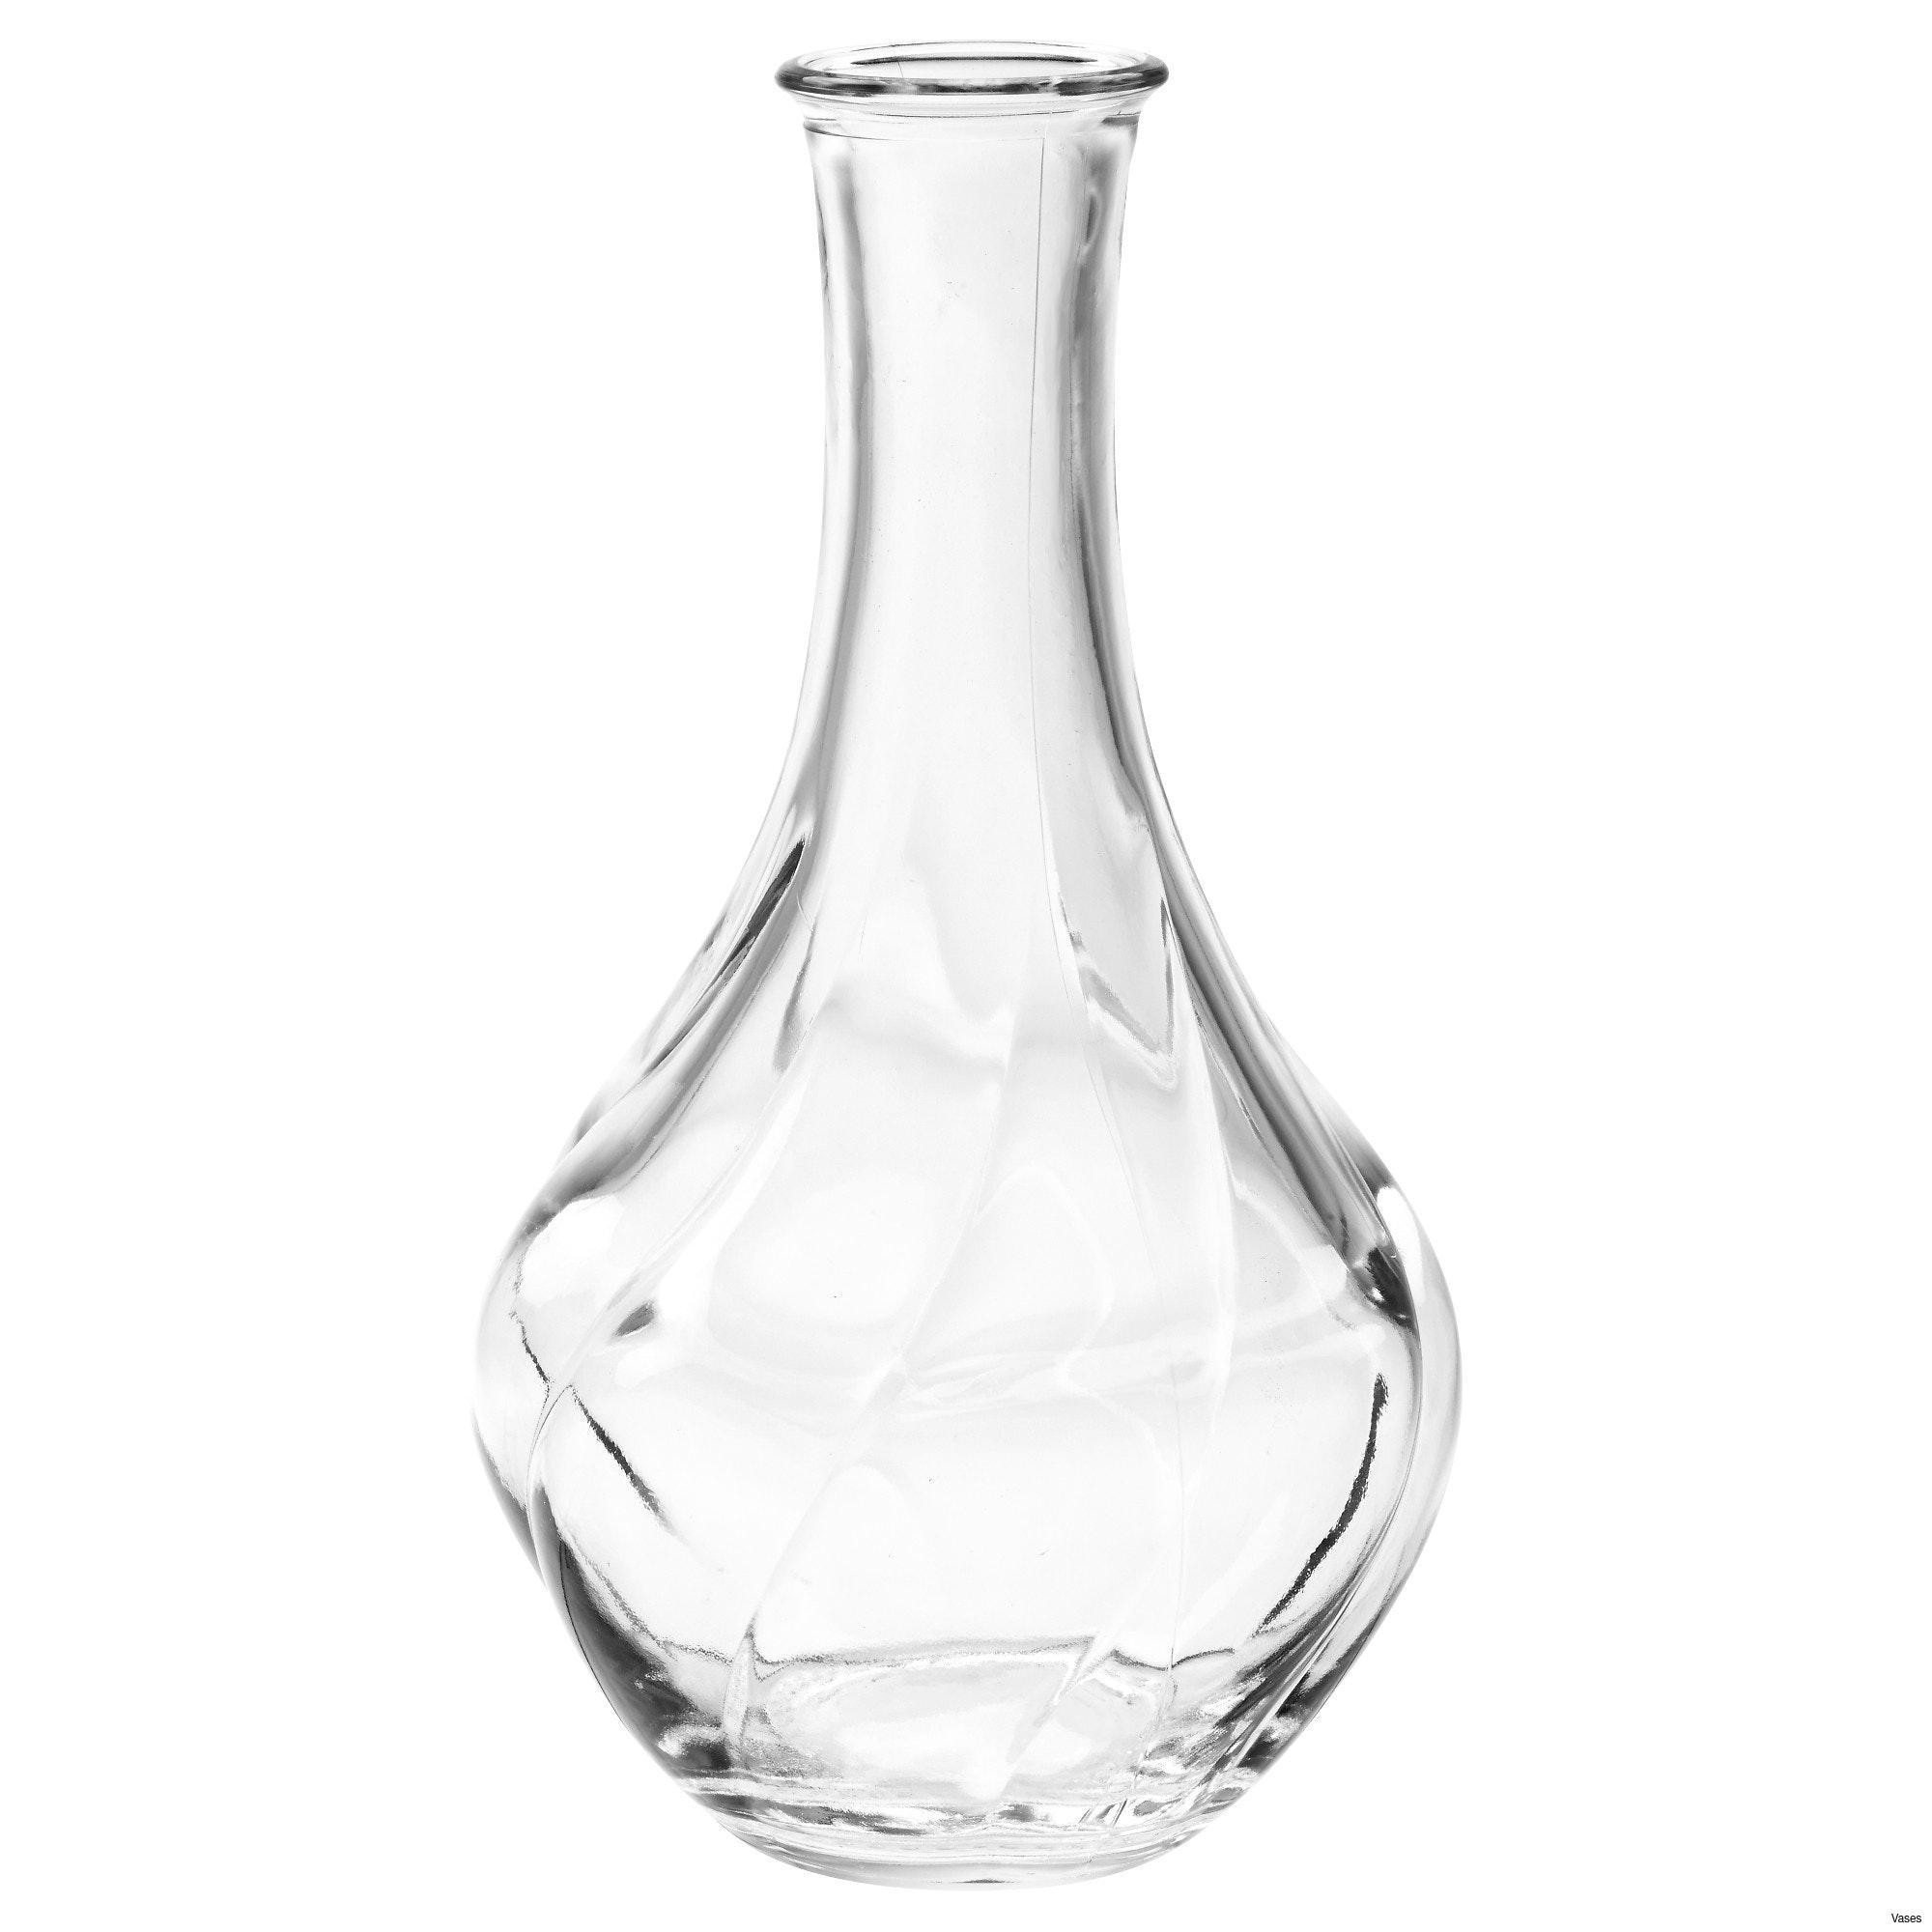 28 Fabulous Glass Light Bulb Vase 2024 free download glass light bulb vase of large glass vases pictures clear glass planters fresh clear glass throughout large glass vases gallery living room glass vases fresh clear vase 0d tags amazing and o